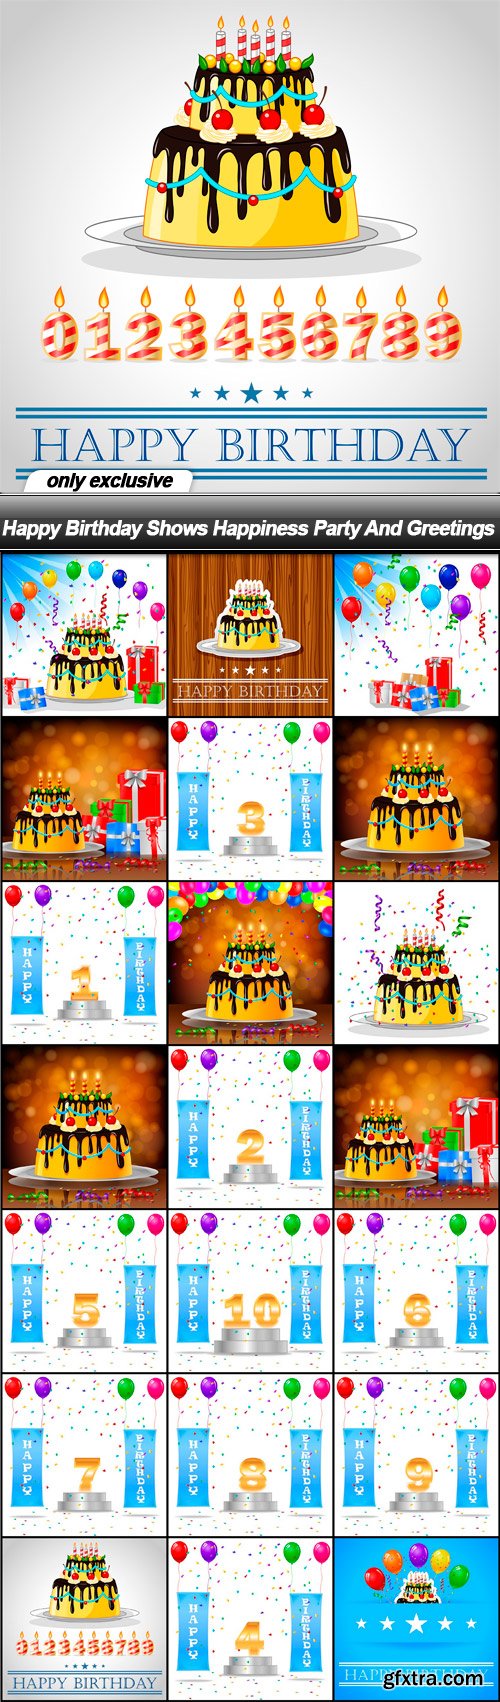 Happy Birthday Shows Happiness Party And Greetings - 21 EPS